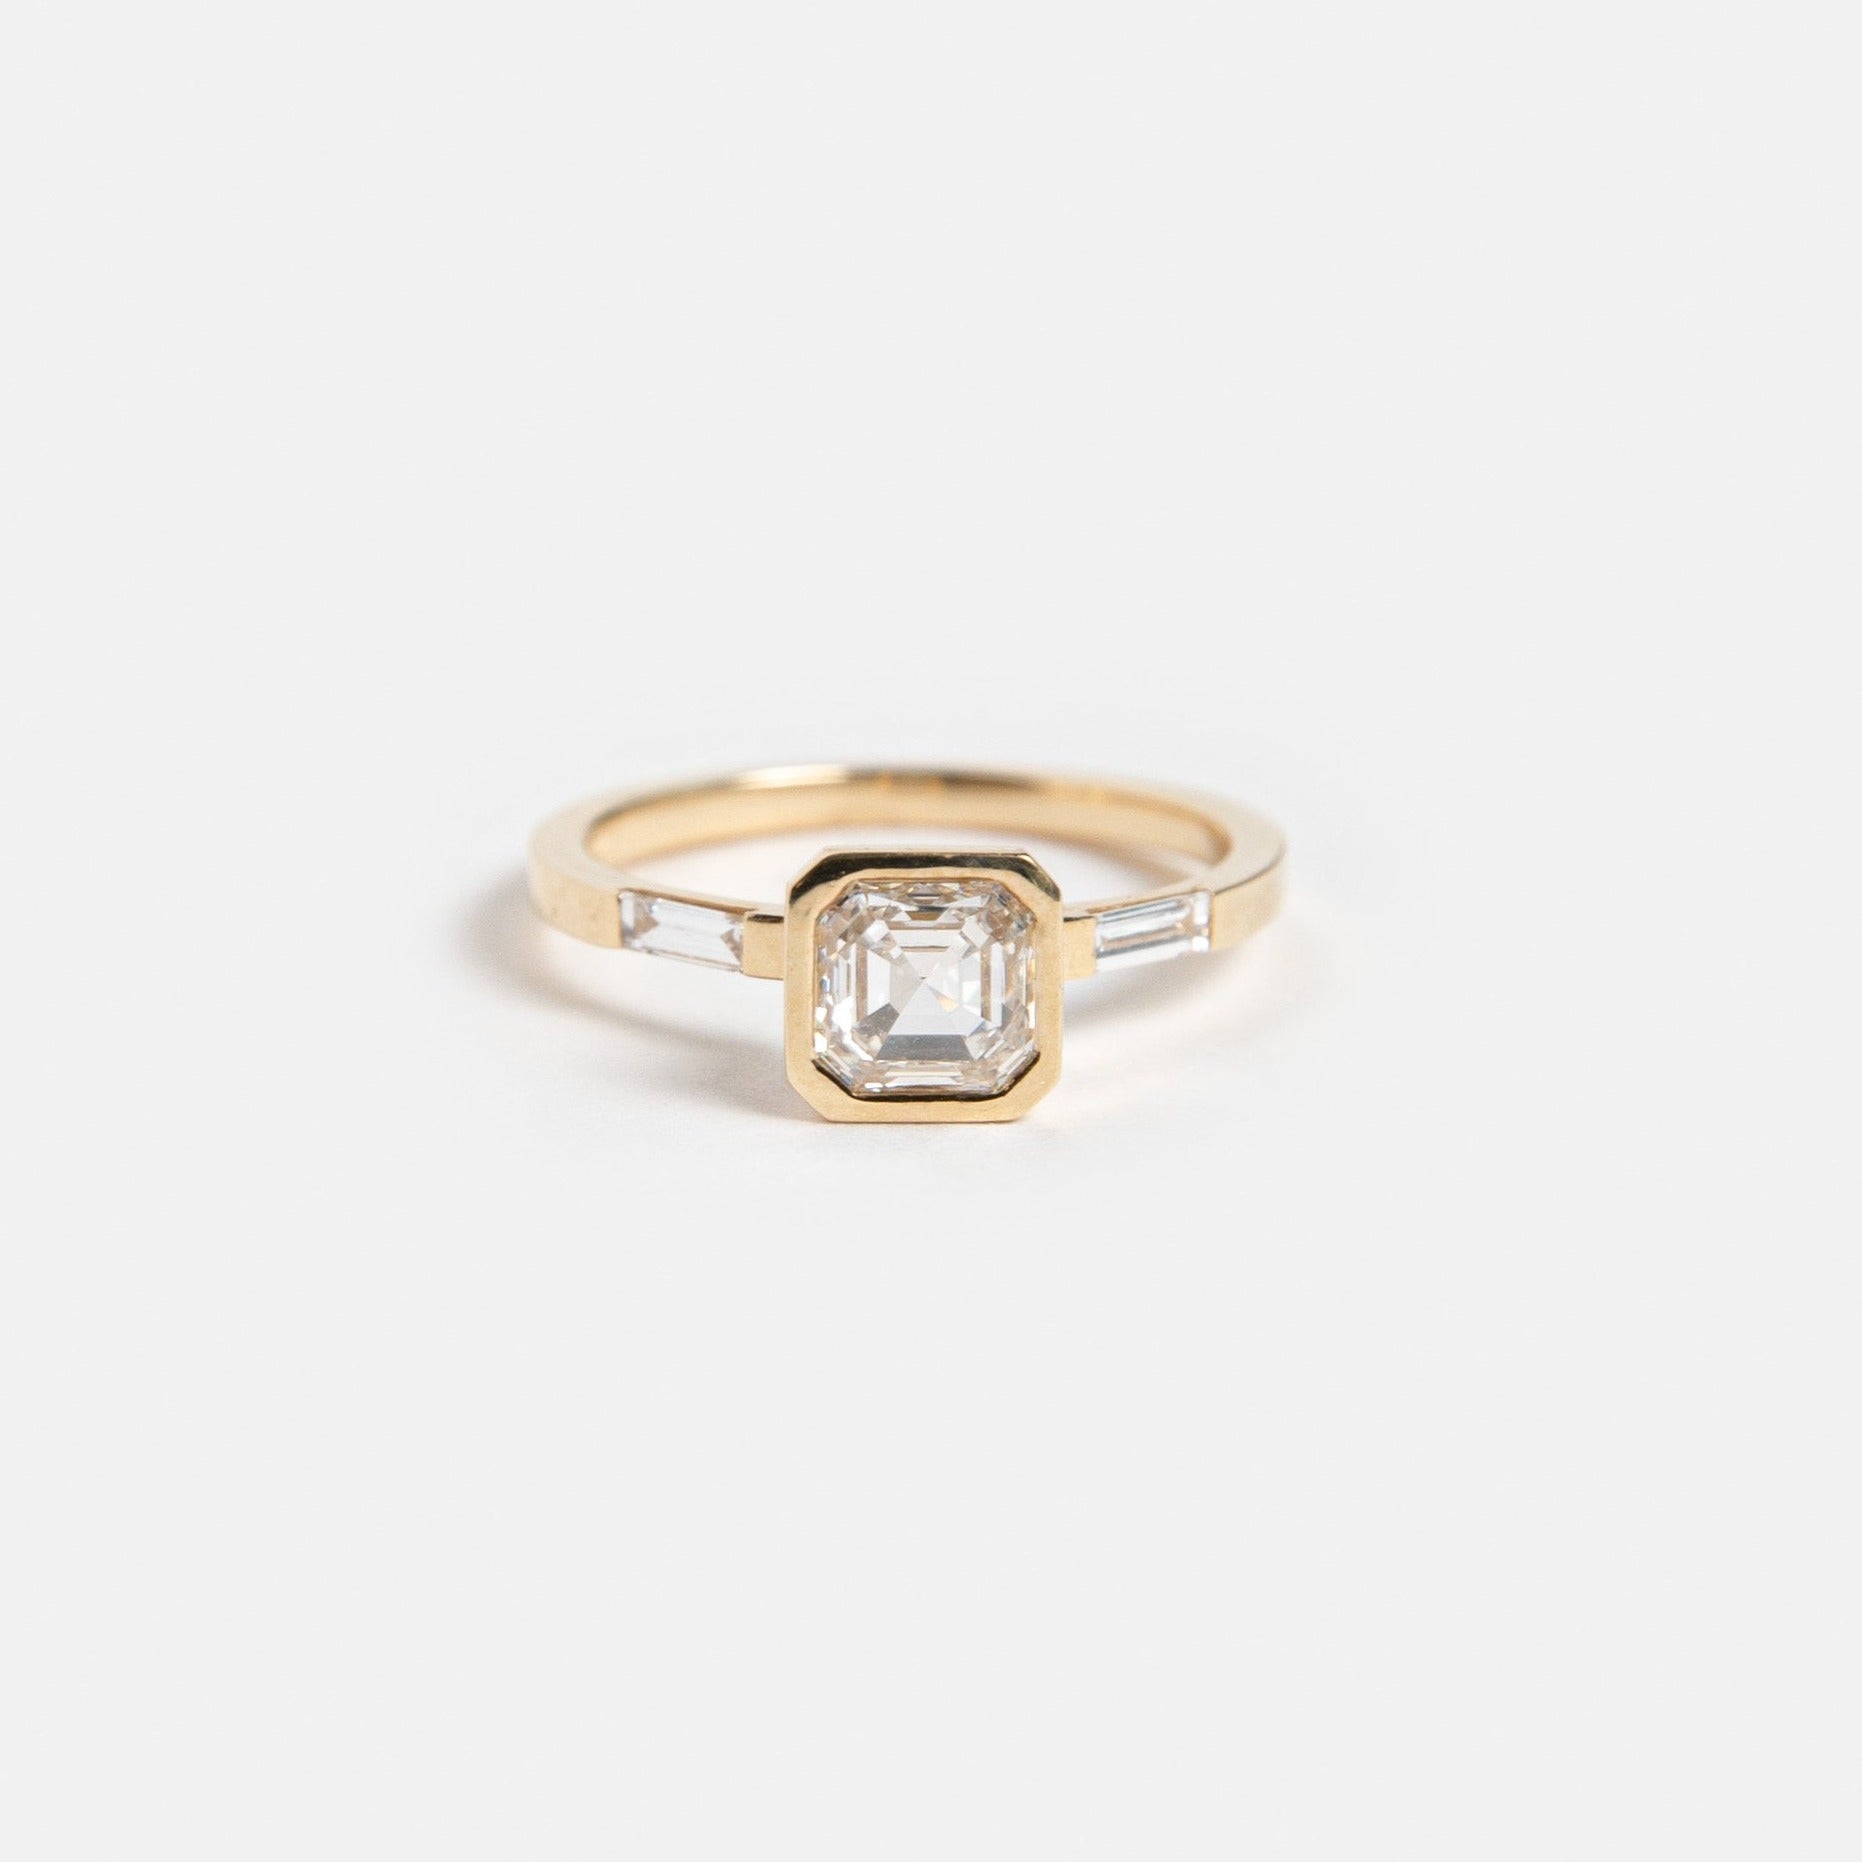 Aida Unique Ring in 14k Gold set with a square cut lab-grown diamond and two baguette cut lab-grown diamonds By SHW Fine Jewelry NYC